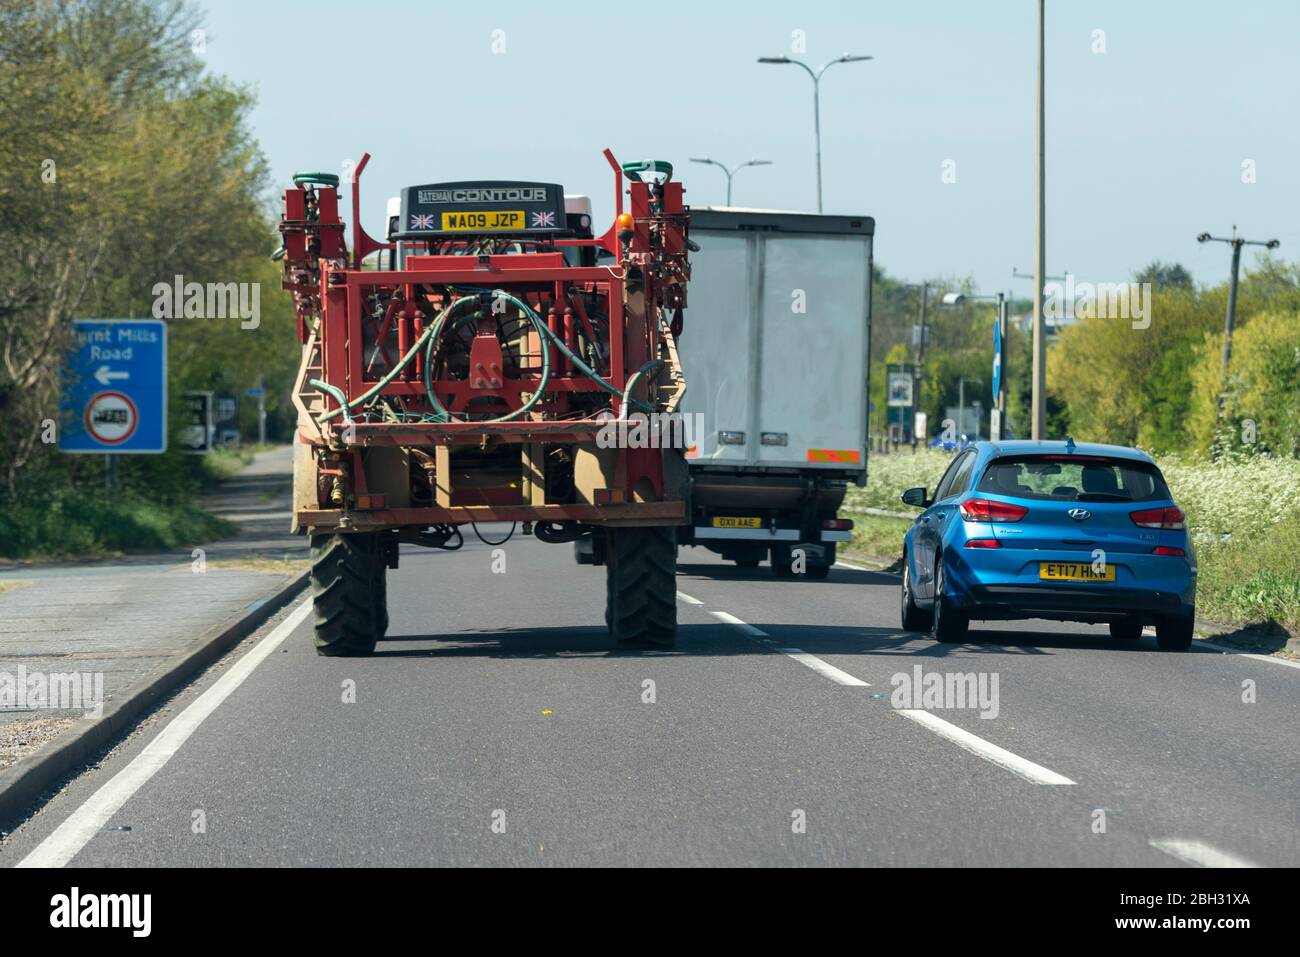 Farm vehicle driving in traffic on A127 arterial, road Essex. Slow agricultural tractor being overtaken by lorry, truck, holding up vehicles. Industry Stock Photo